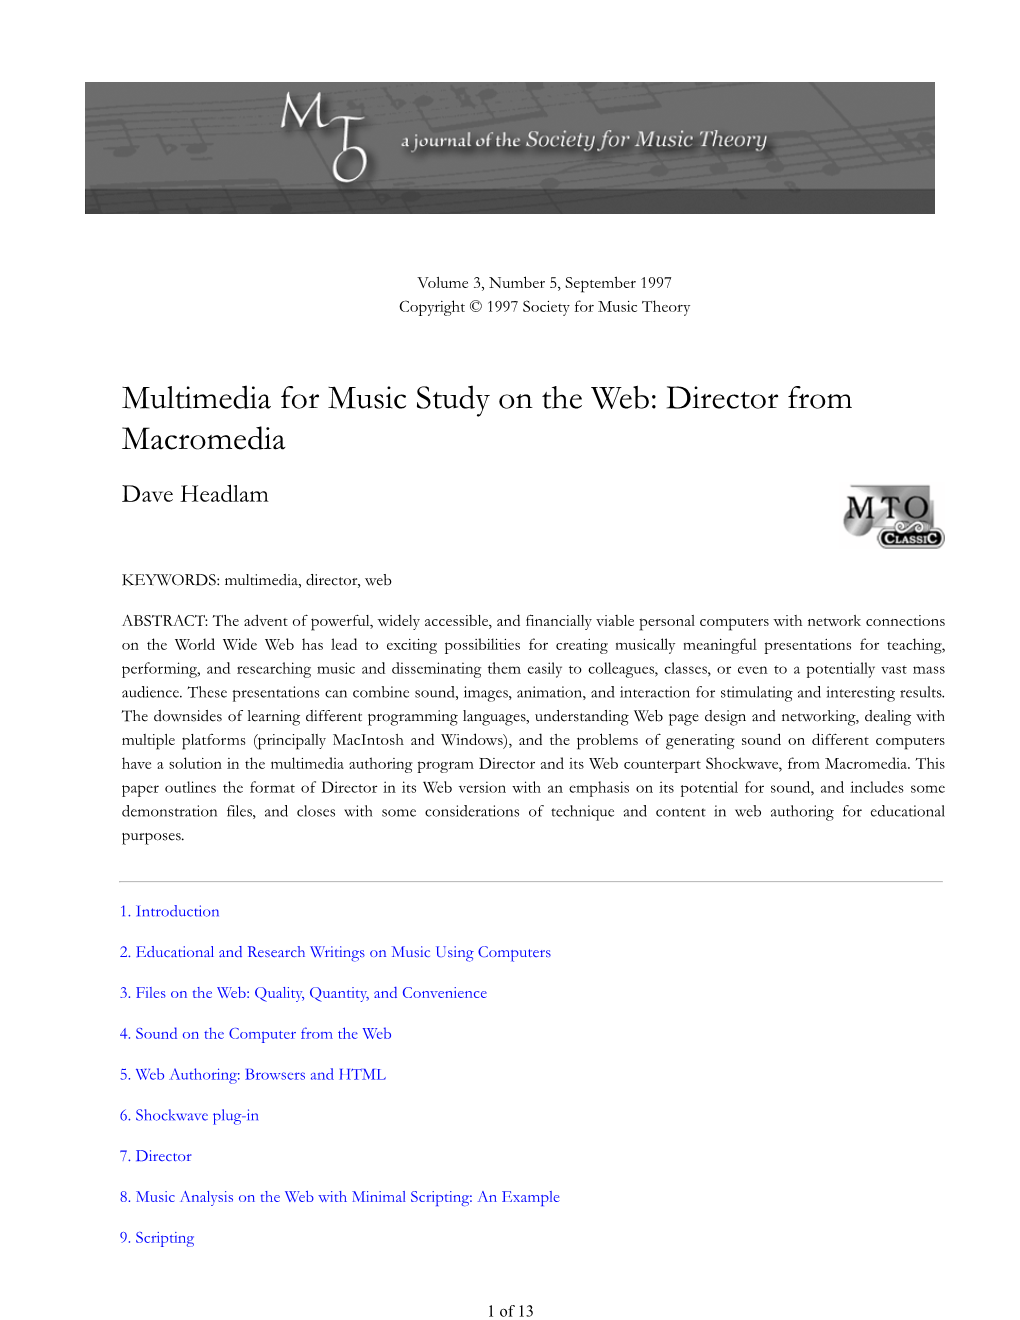 MTO 3.5: Headlam, Multimedia for Music Study on The